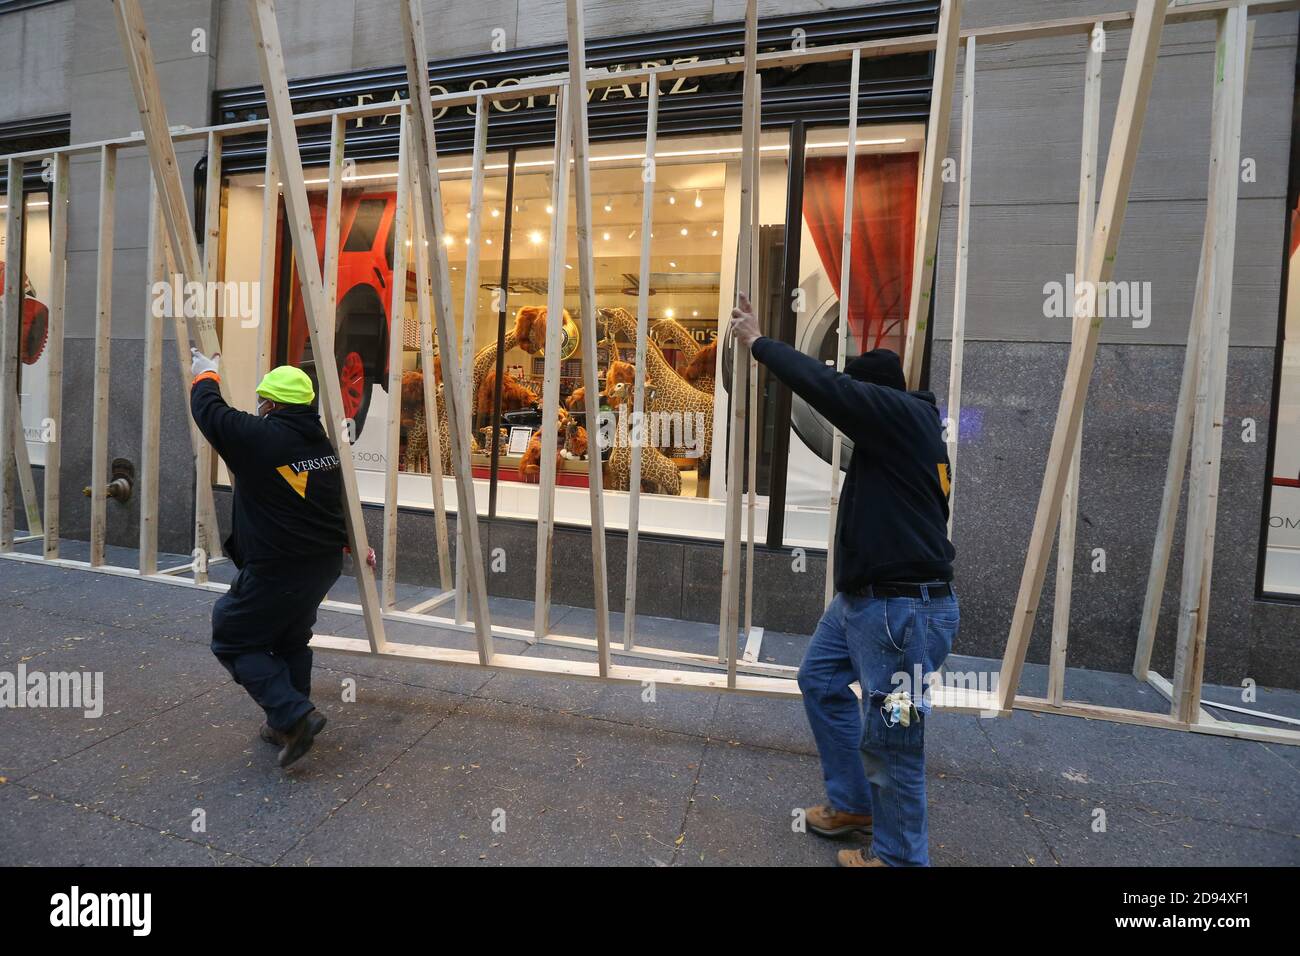 New York, NY, USA. 2nd Nov, 2020. Nov 2, 2020 : New York Stores prepare for possible unrest surrounding election day. The FAO Schwartz Store at Rockefeller Center is boarded up, Credit: Dan Herrick/ZUMA Wire/Alamy Live News Stock Photo